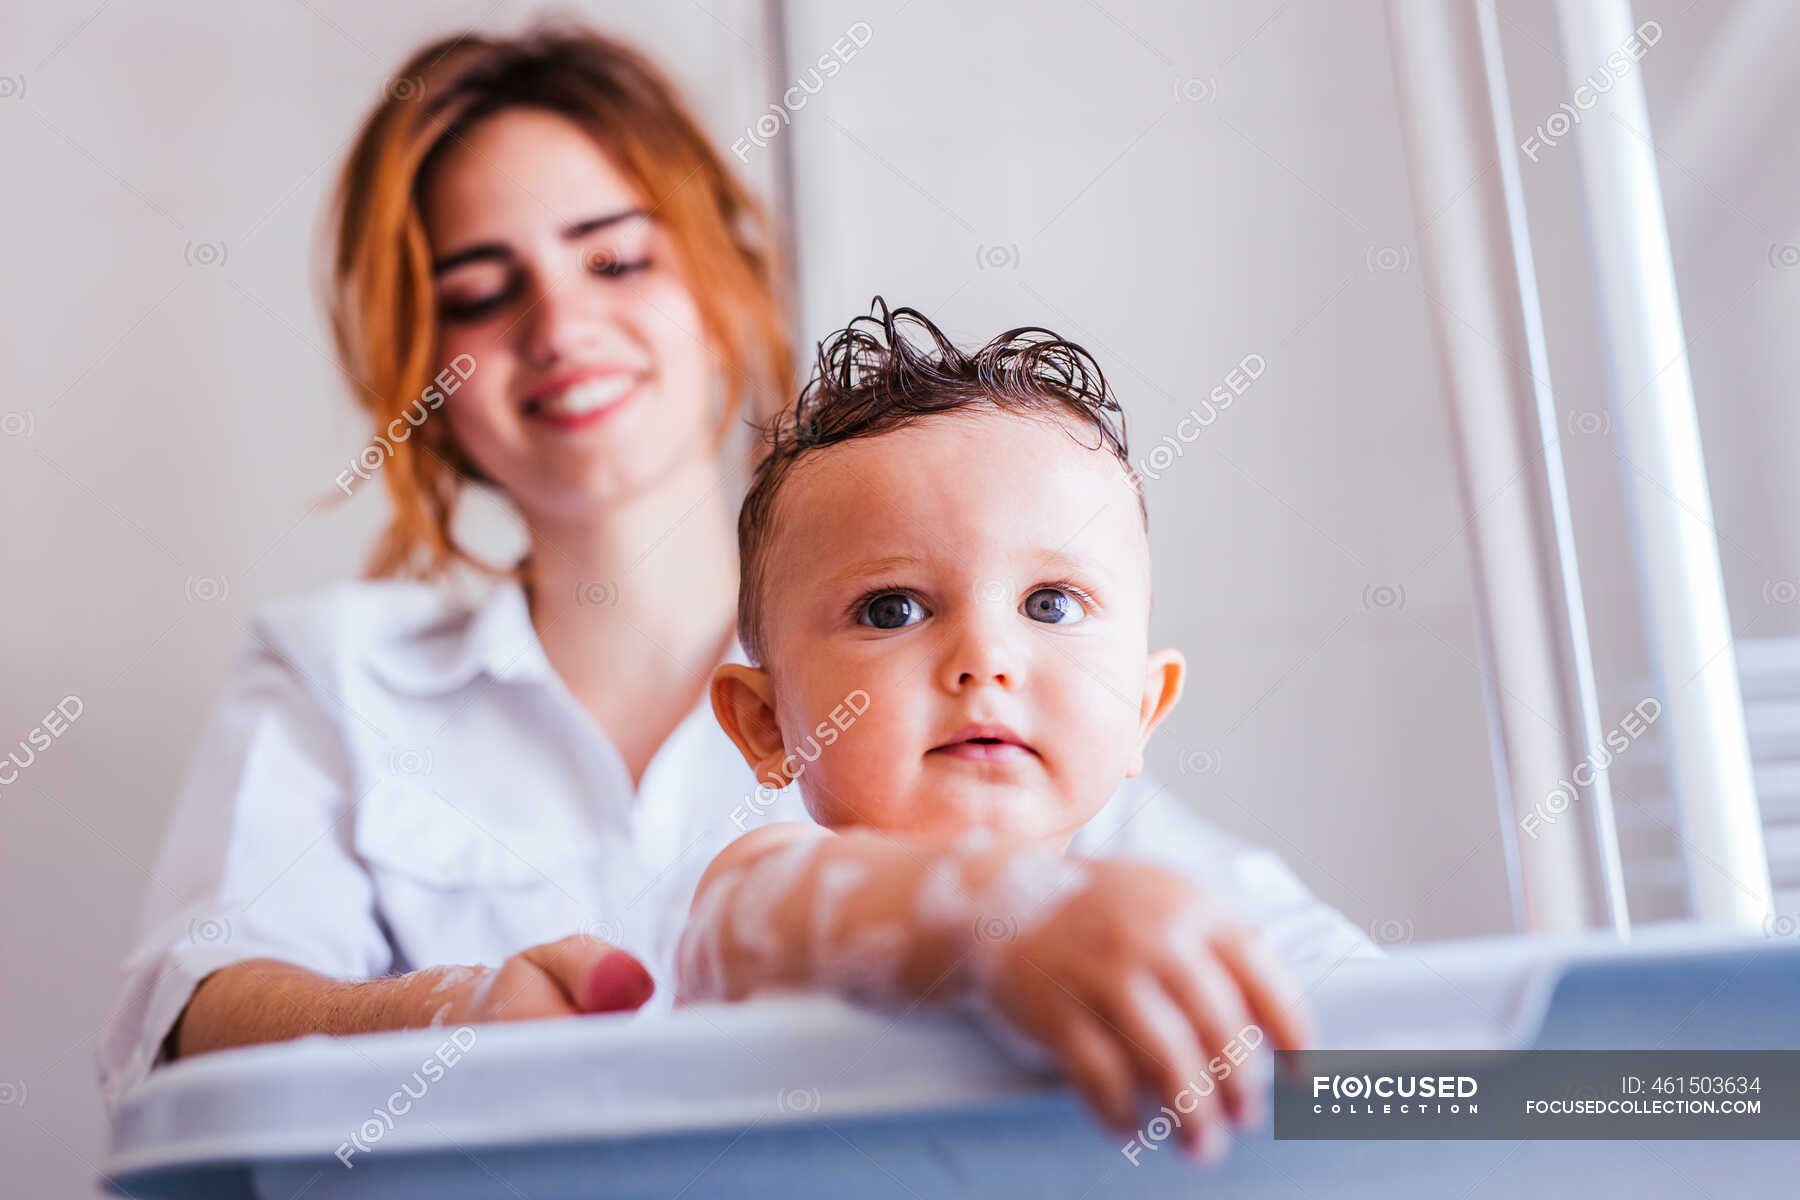 wife bathing and son